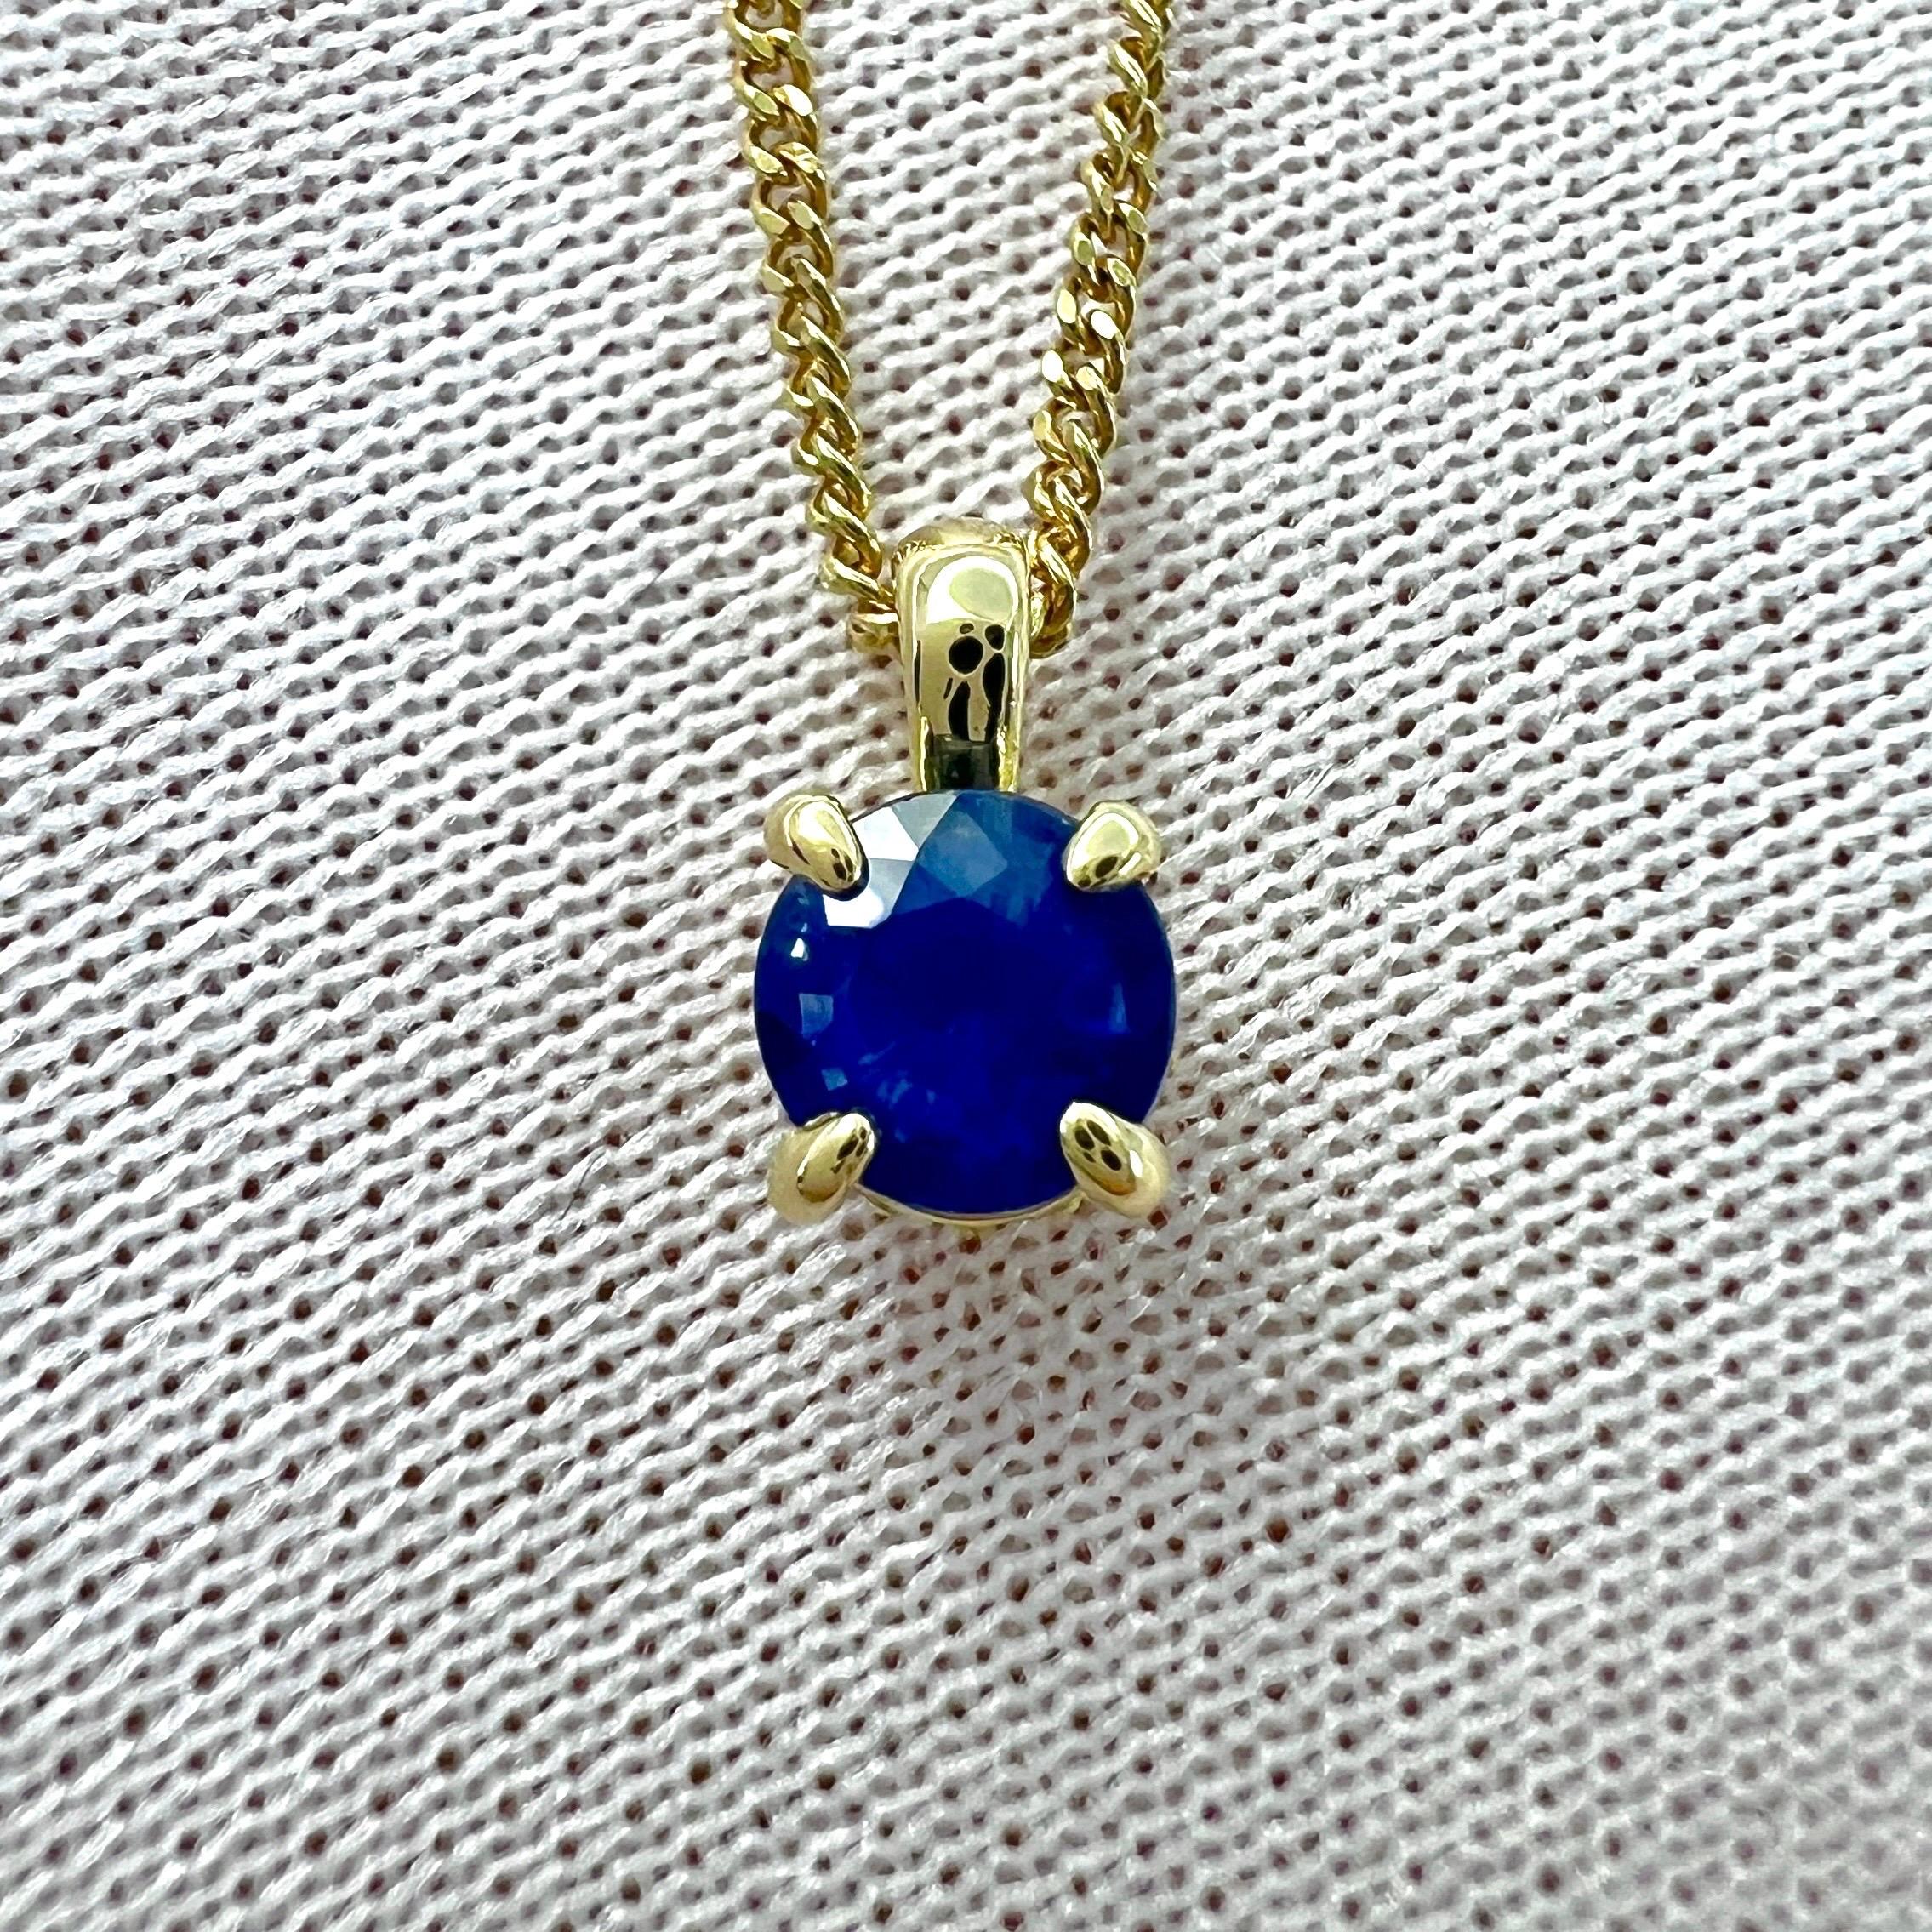 Fine Cornflower Round Cut Ceylon Blue Sapphire & Diamond 18k Yellow Gold Pendant.

0.50 Carat sapphire with a fine vivid cornflower blue colour and very good clarity. A very clean stone with only some very small natural inclusions visible when